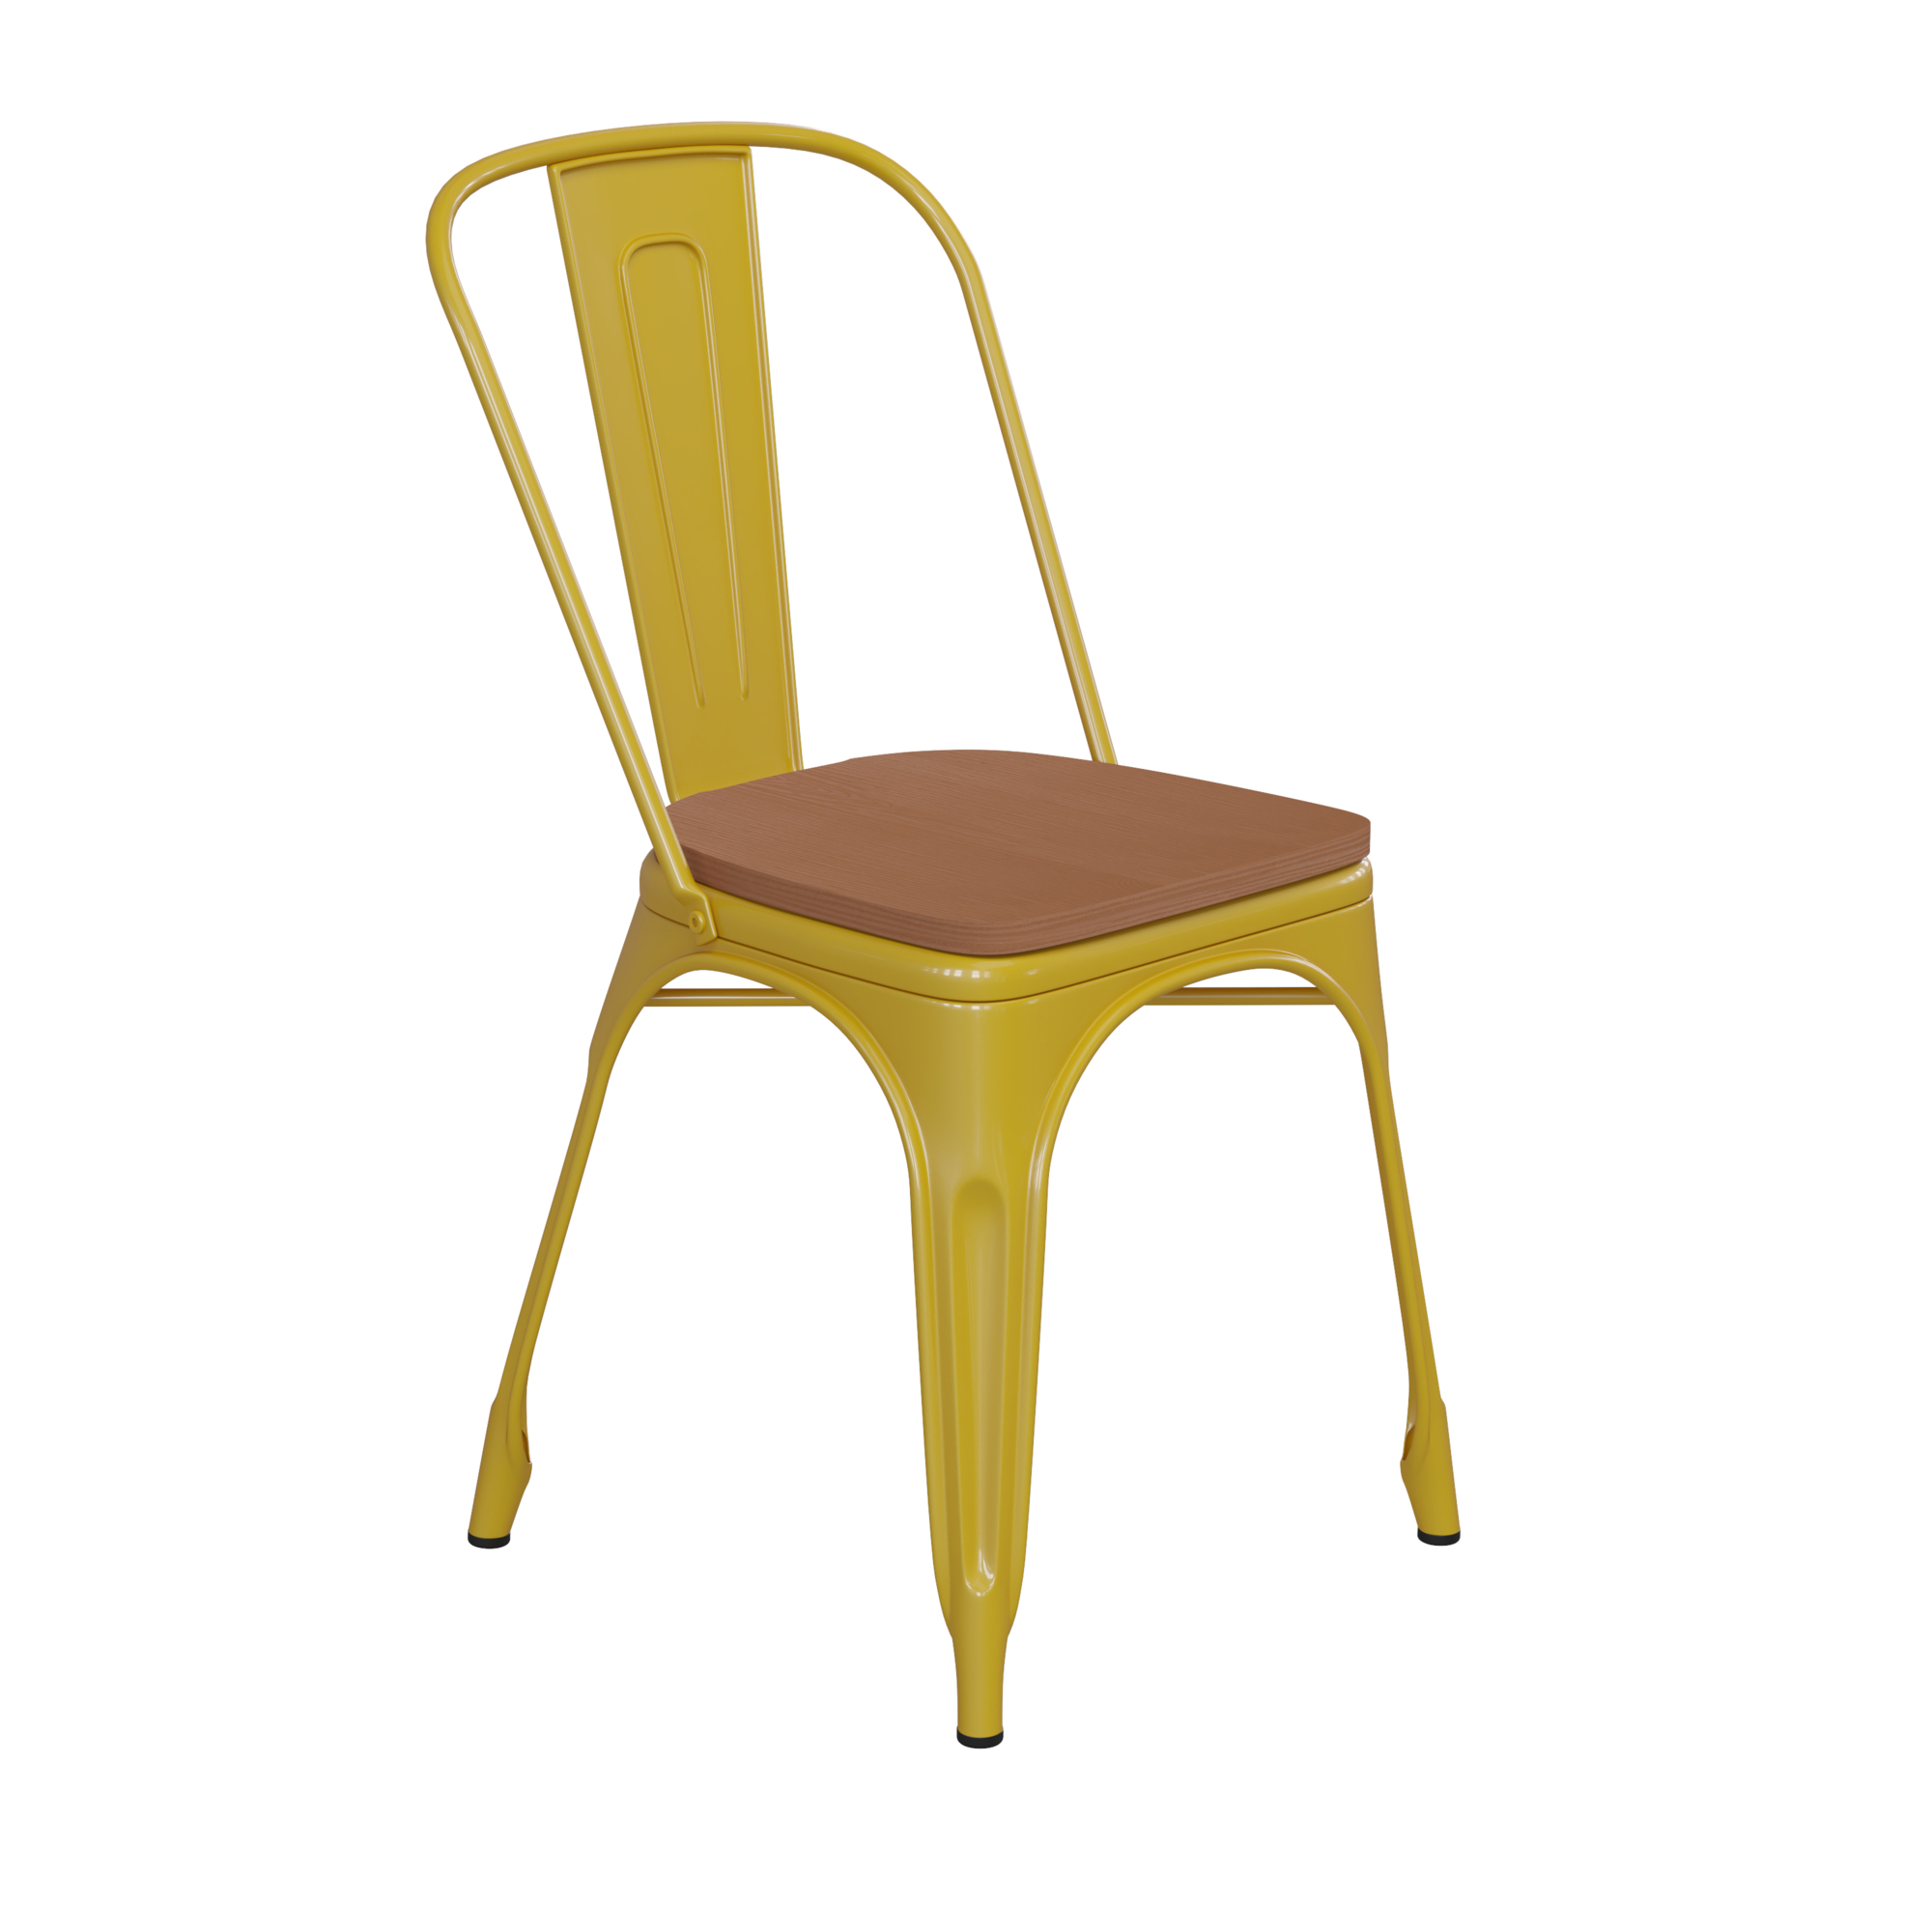 Flash Furniture, Yellow Metal Stack Chair with Teak Poly Resin Seat, Primary Color Yellow, Included (qty.) 1, Model CH31230YLPL1T